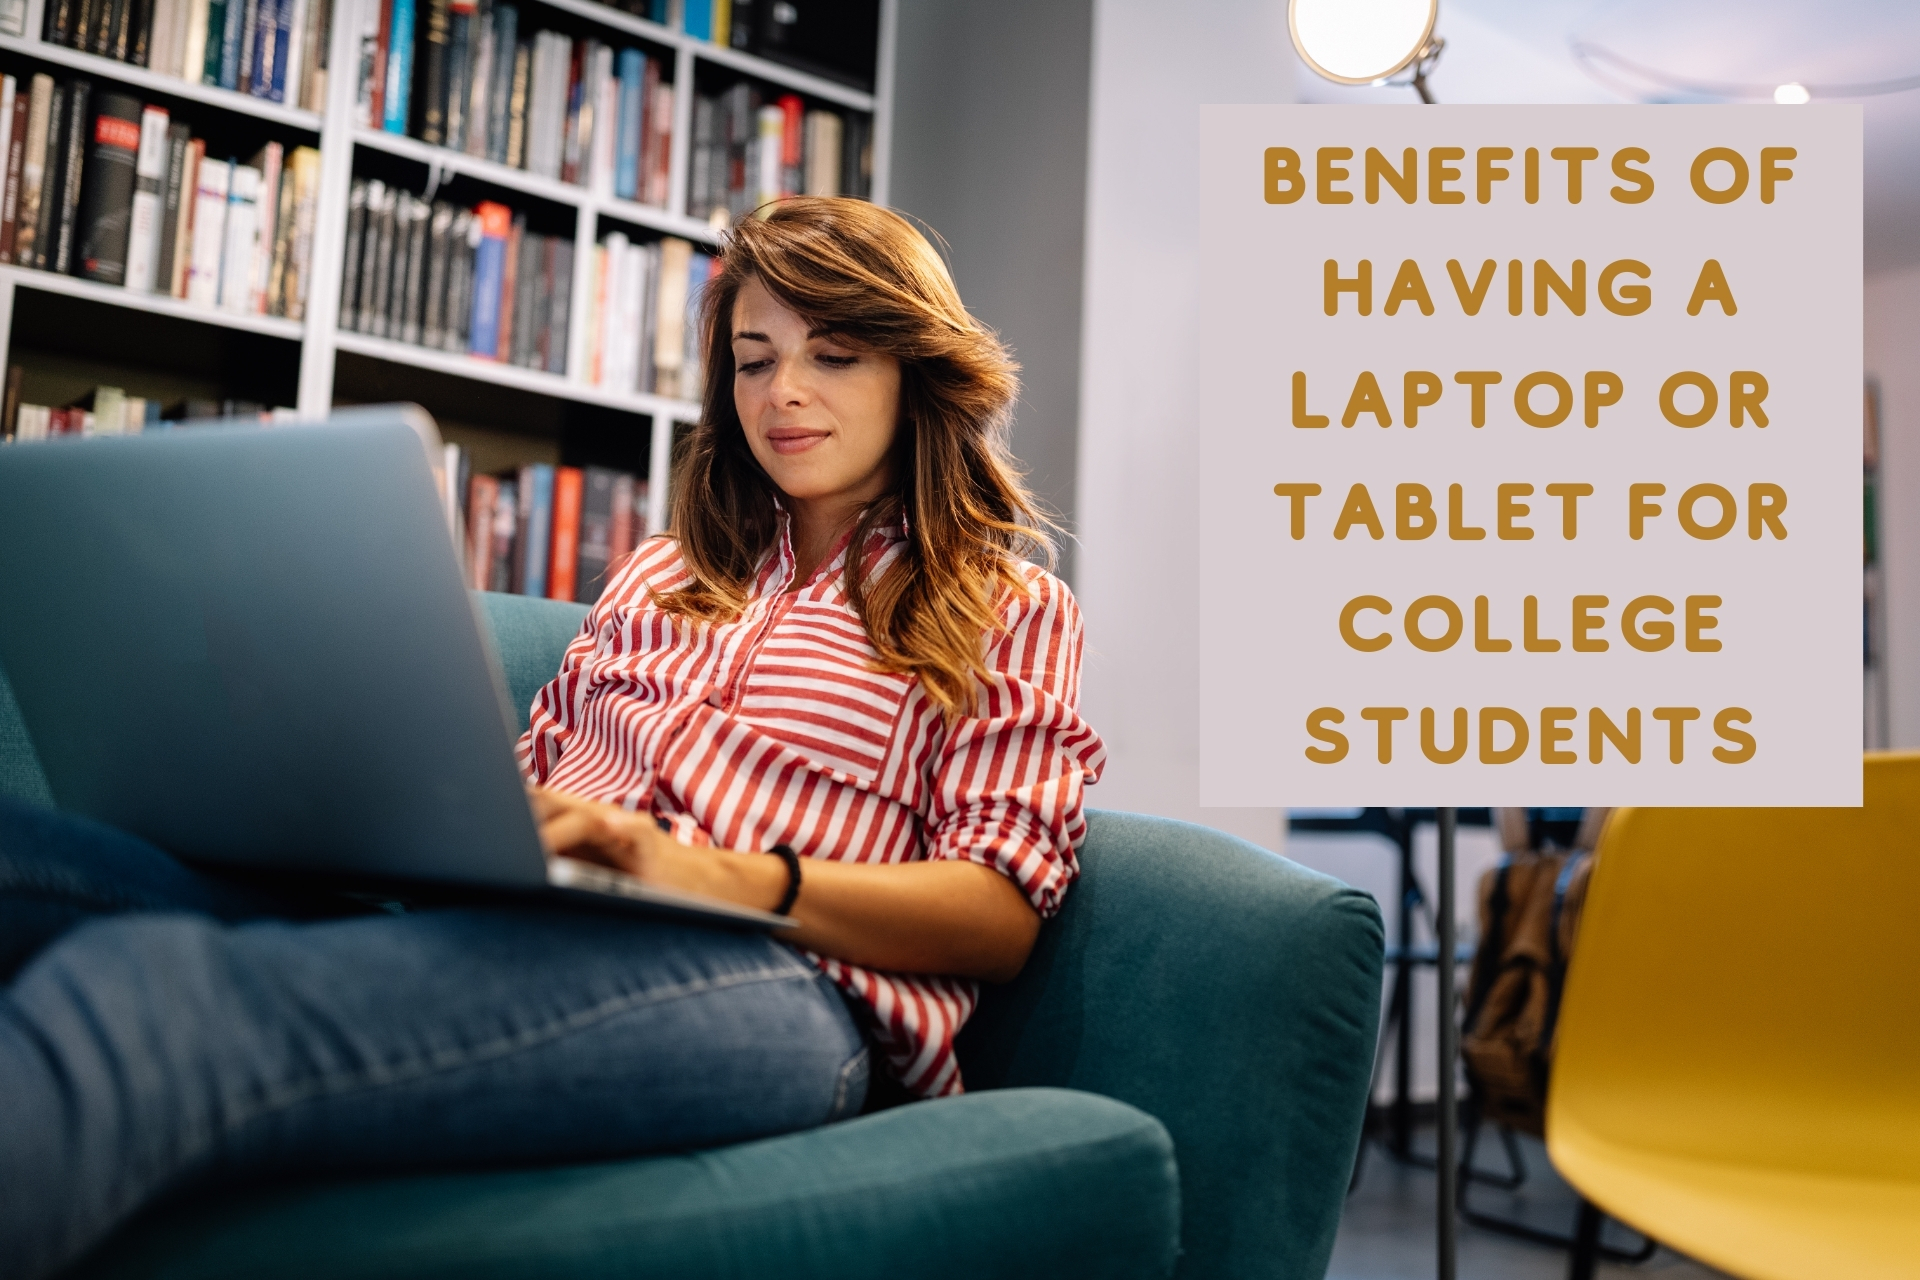 write an essay about the benefits of laptop